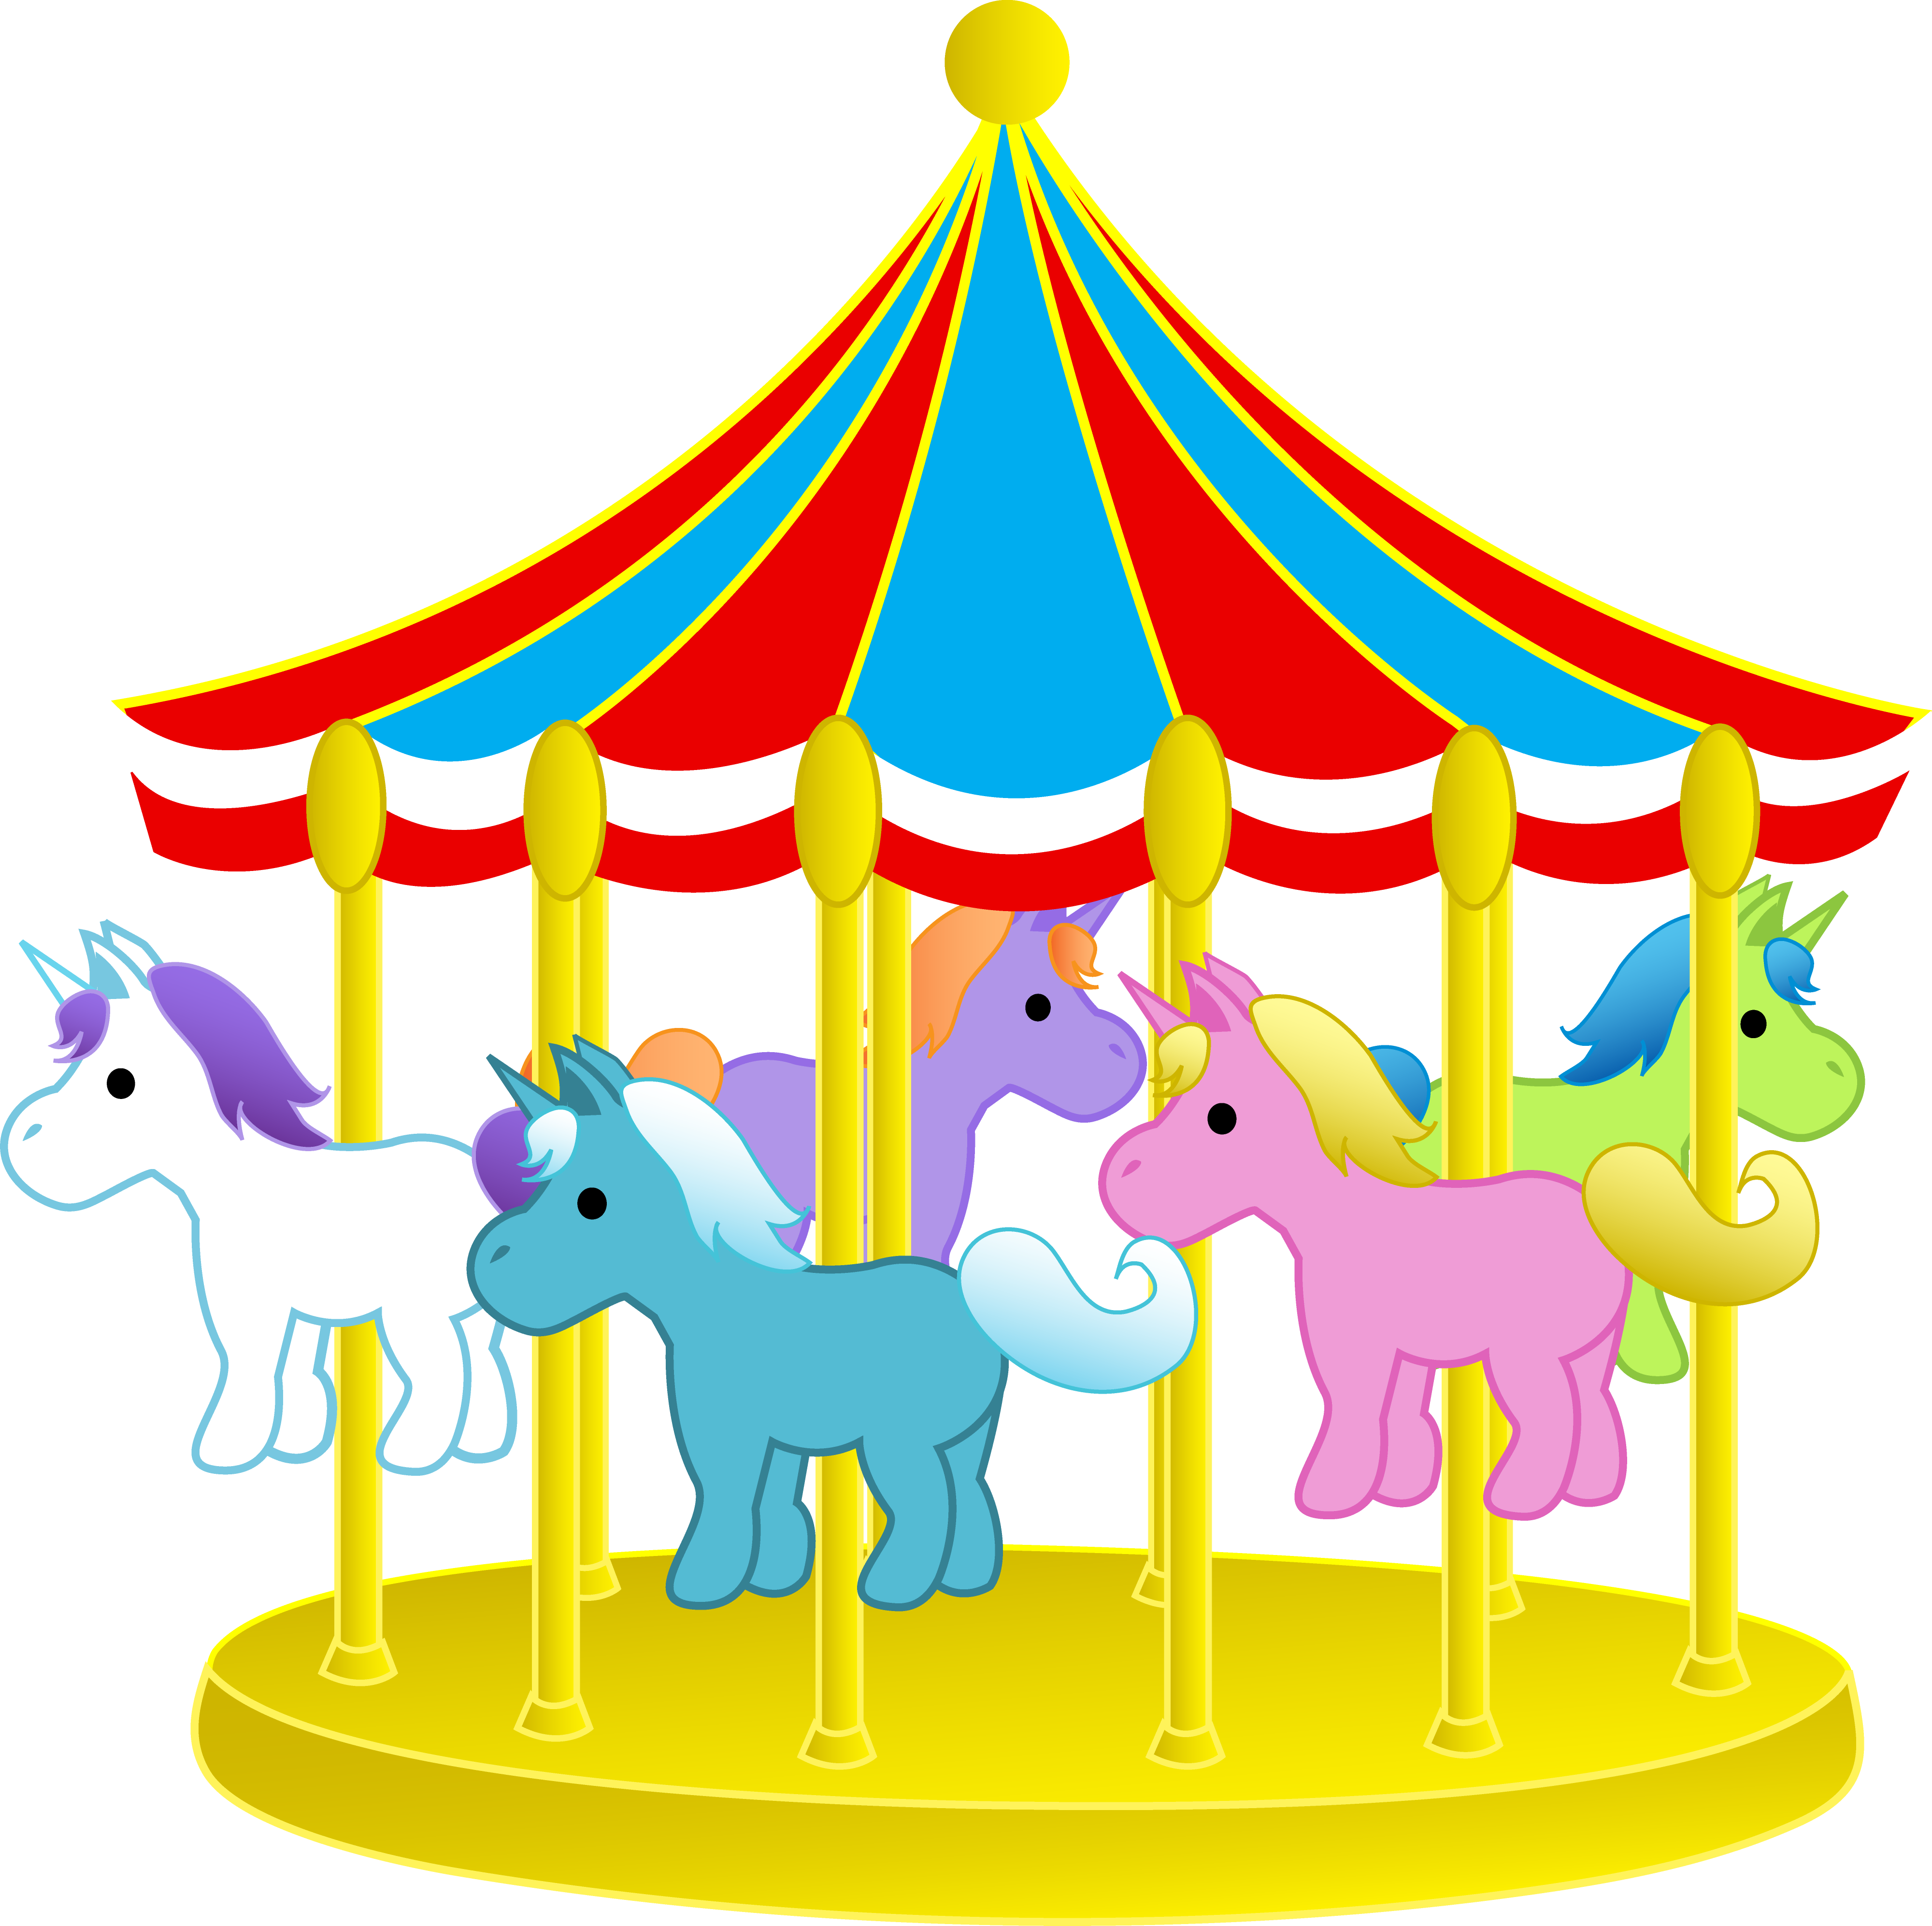 Puzzle clipart structure. Cute carnival carousel with